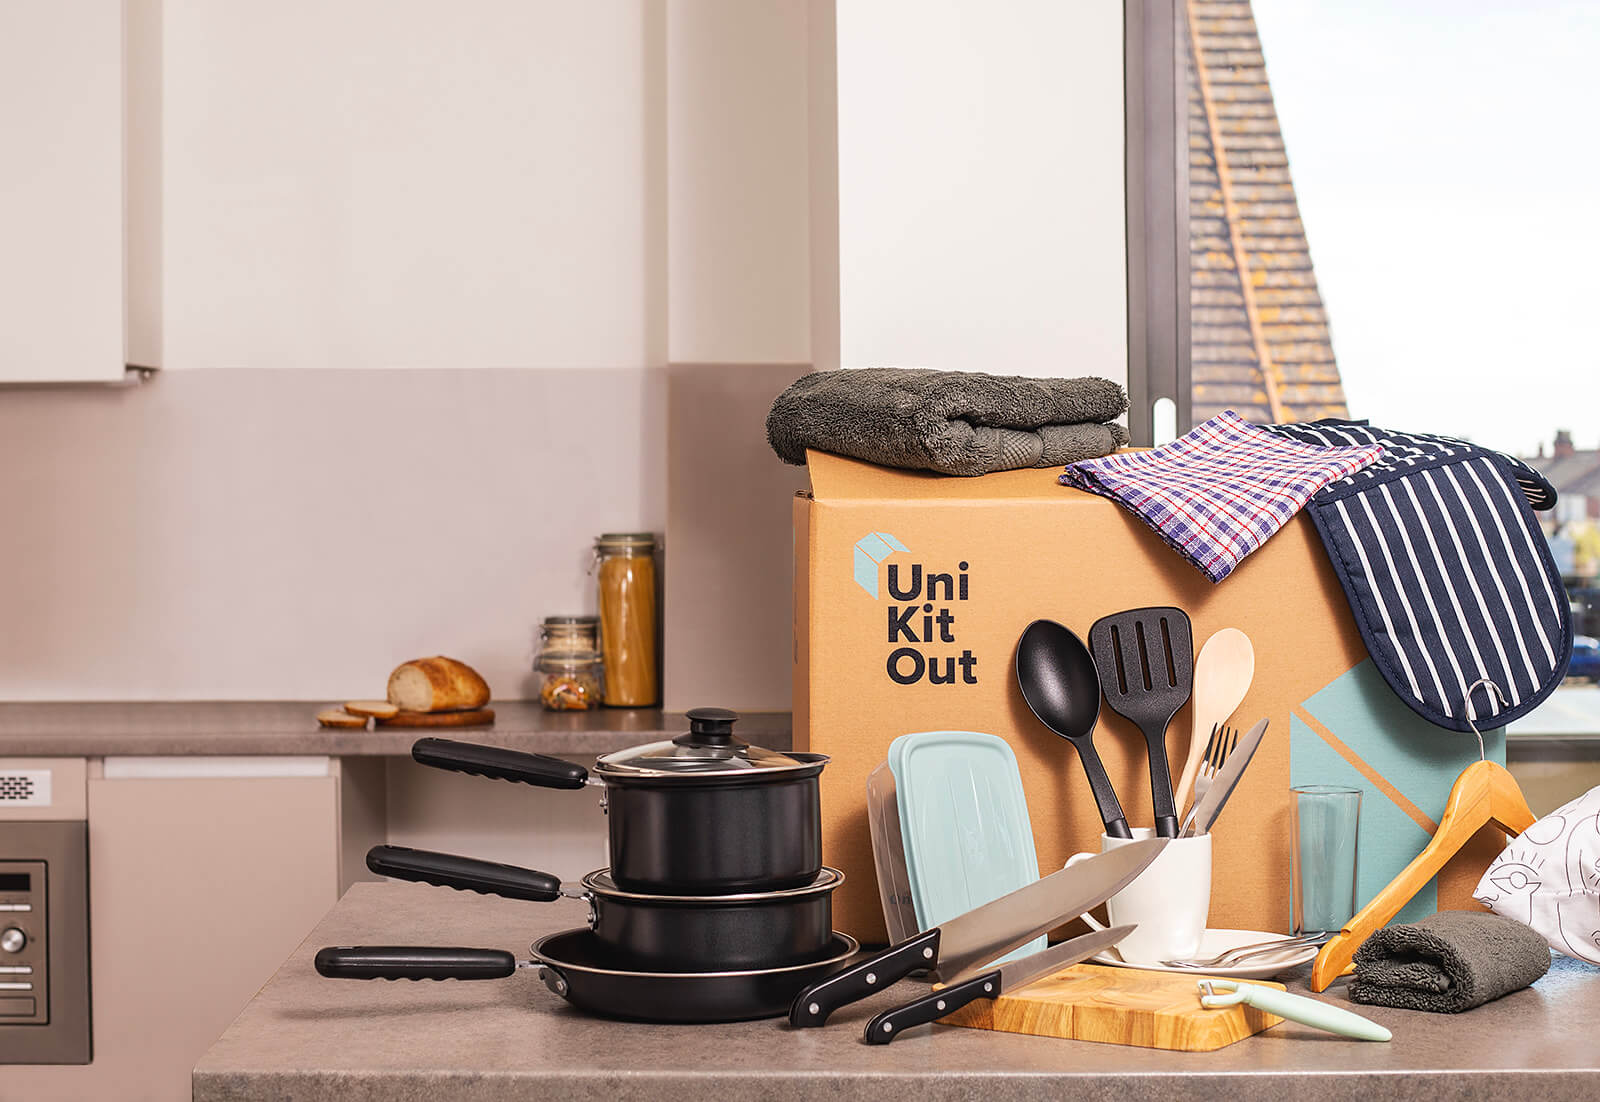 Starter kitchen essentials to make meals right in your dorm or apartment